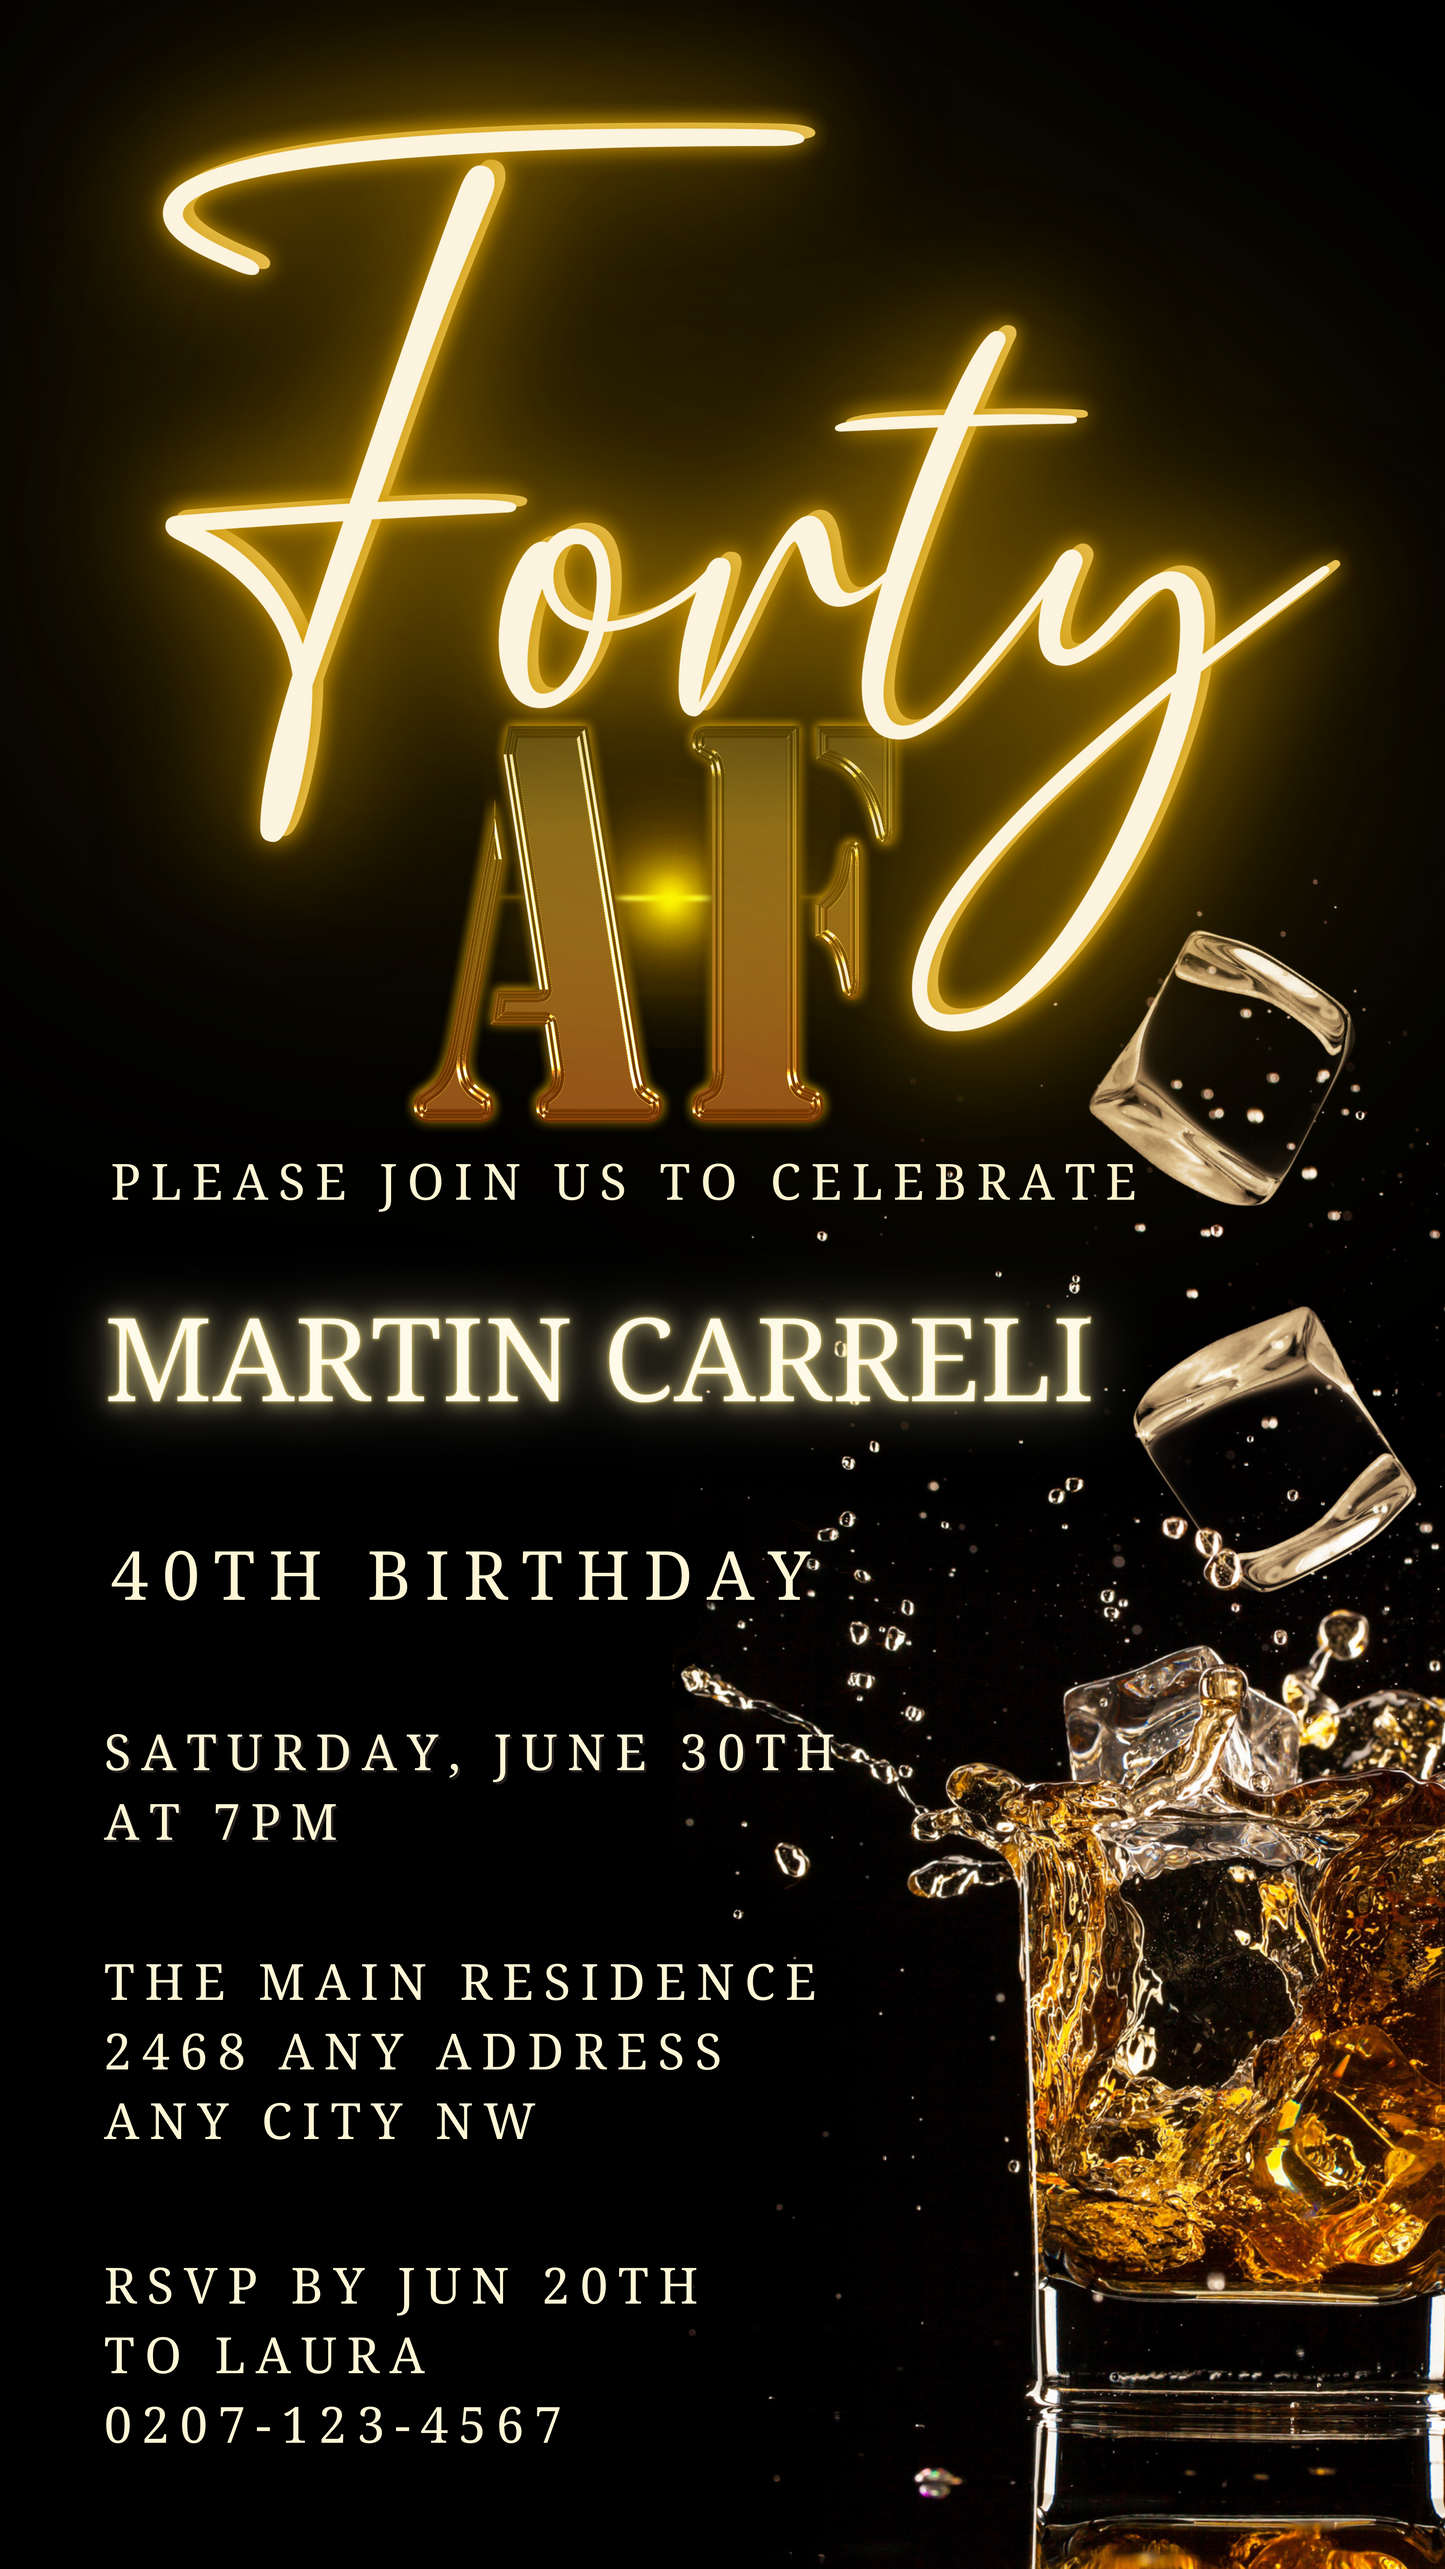 Customisable Black Gold Neon Cube Splash 40AF Birthday Evite featuring gold text, ice cubes, and neon accents, editable via Canva for digital sharing.